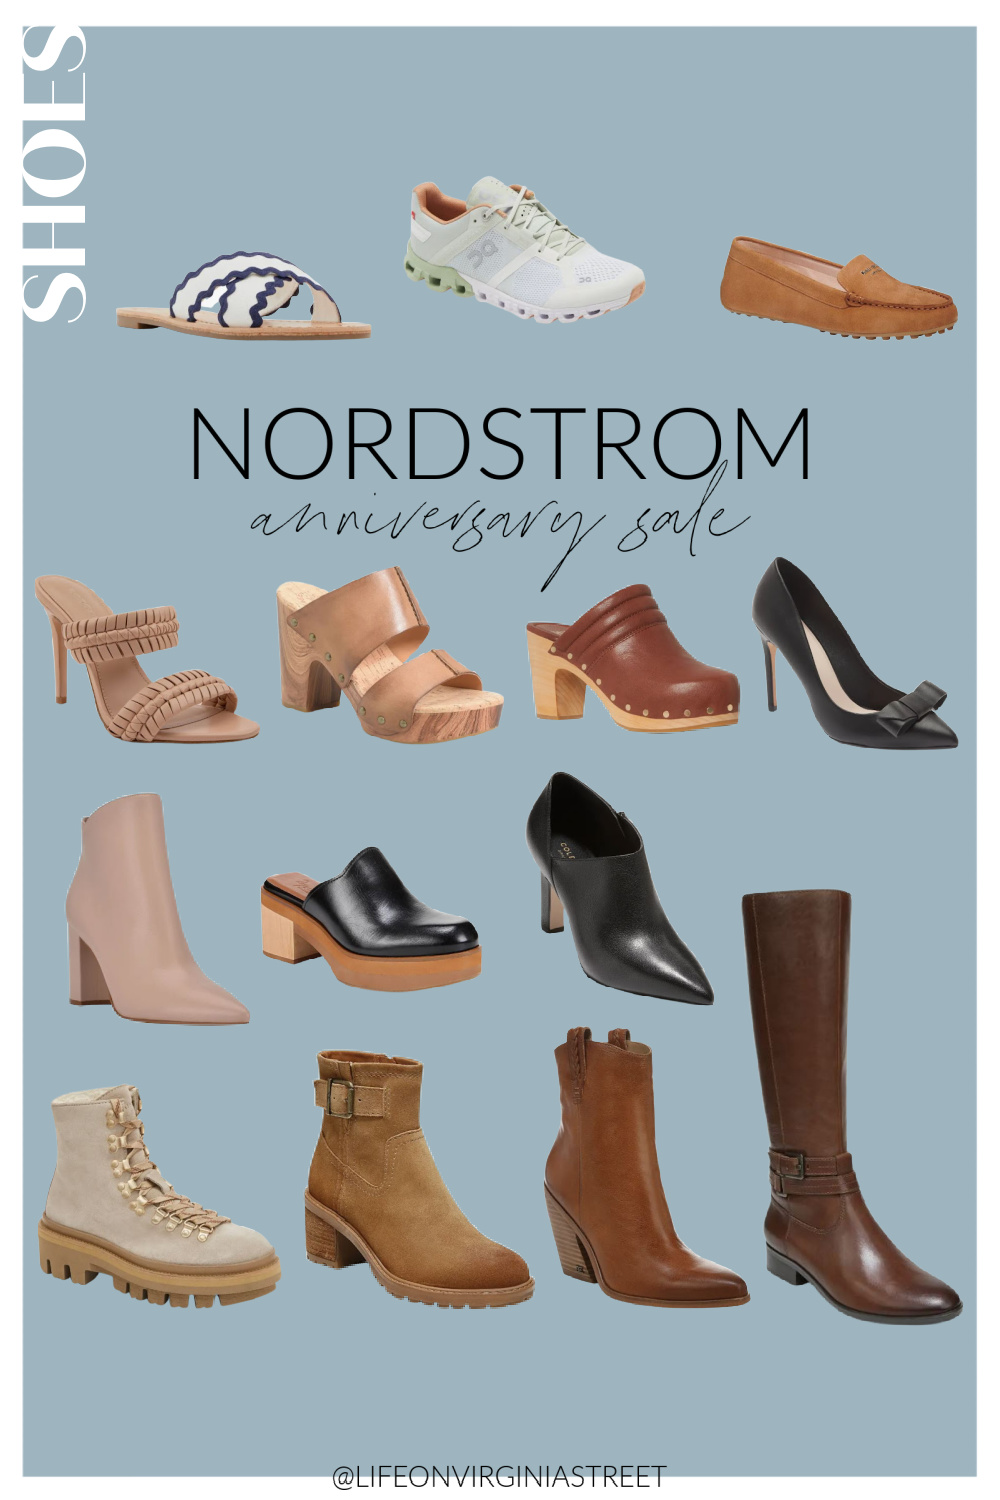 Share more than 79 nordstrom womens sandals best